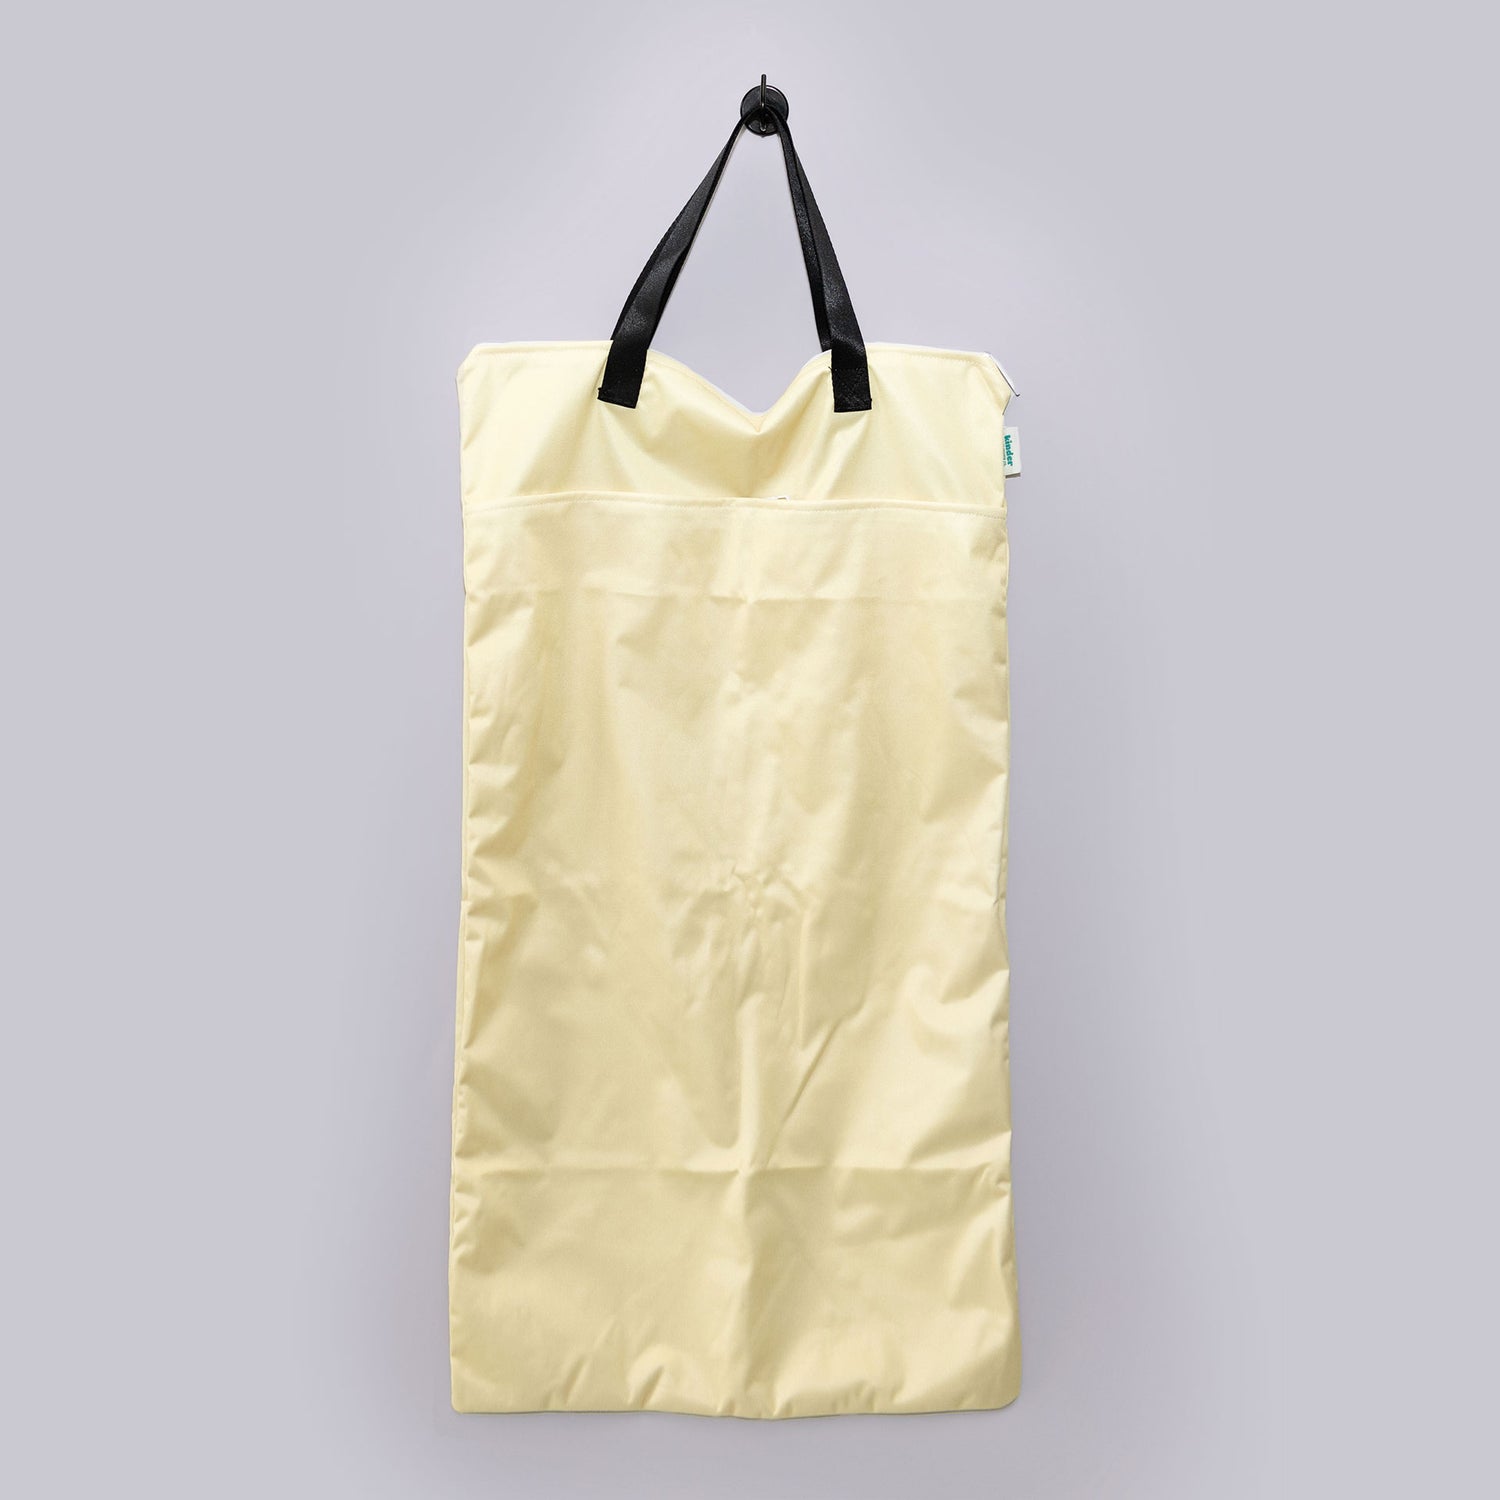 large hanging water resistant wet bag storage bag laundry bag carrying dirty diapers cloth diaper laundry bag zippers yellow pastel